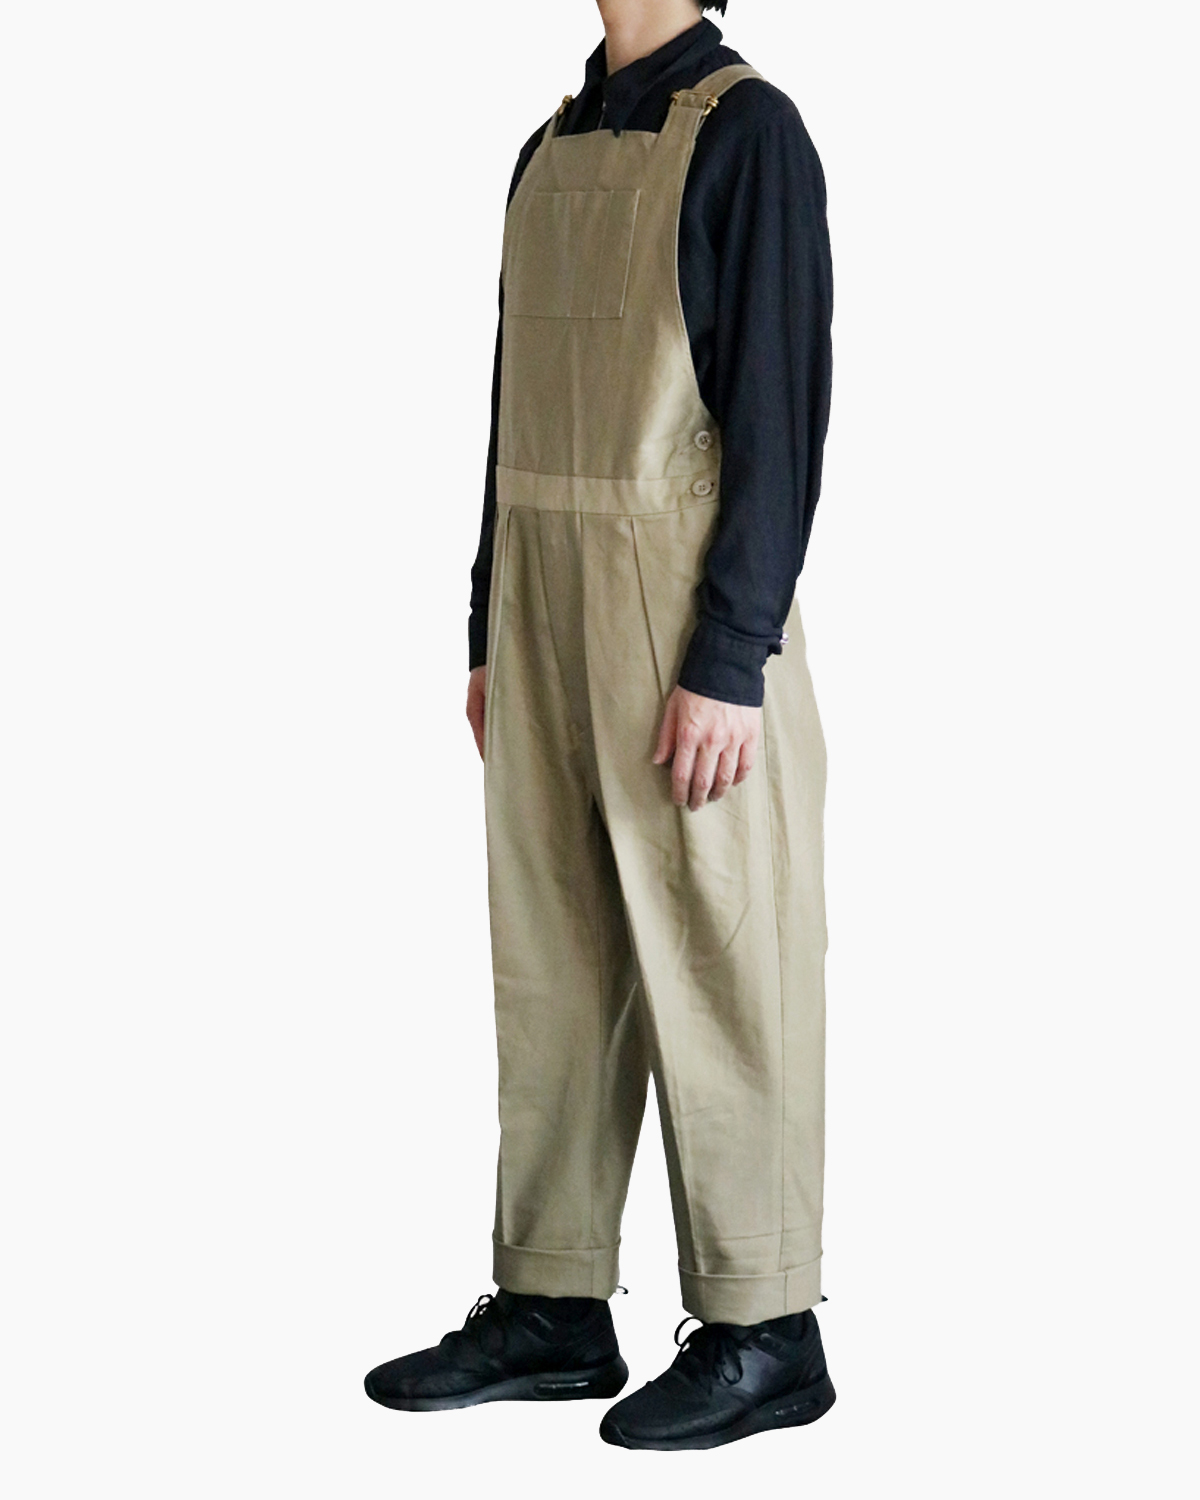 NEAT｜Moleskin｜OVERALL - BEIGE｜PRODUCT｜Continuer Inc.｜メガネ 